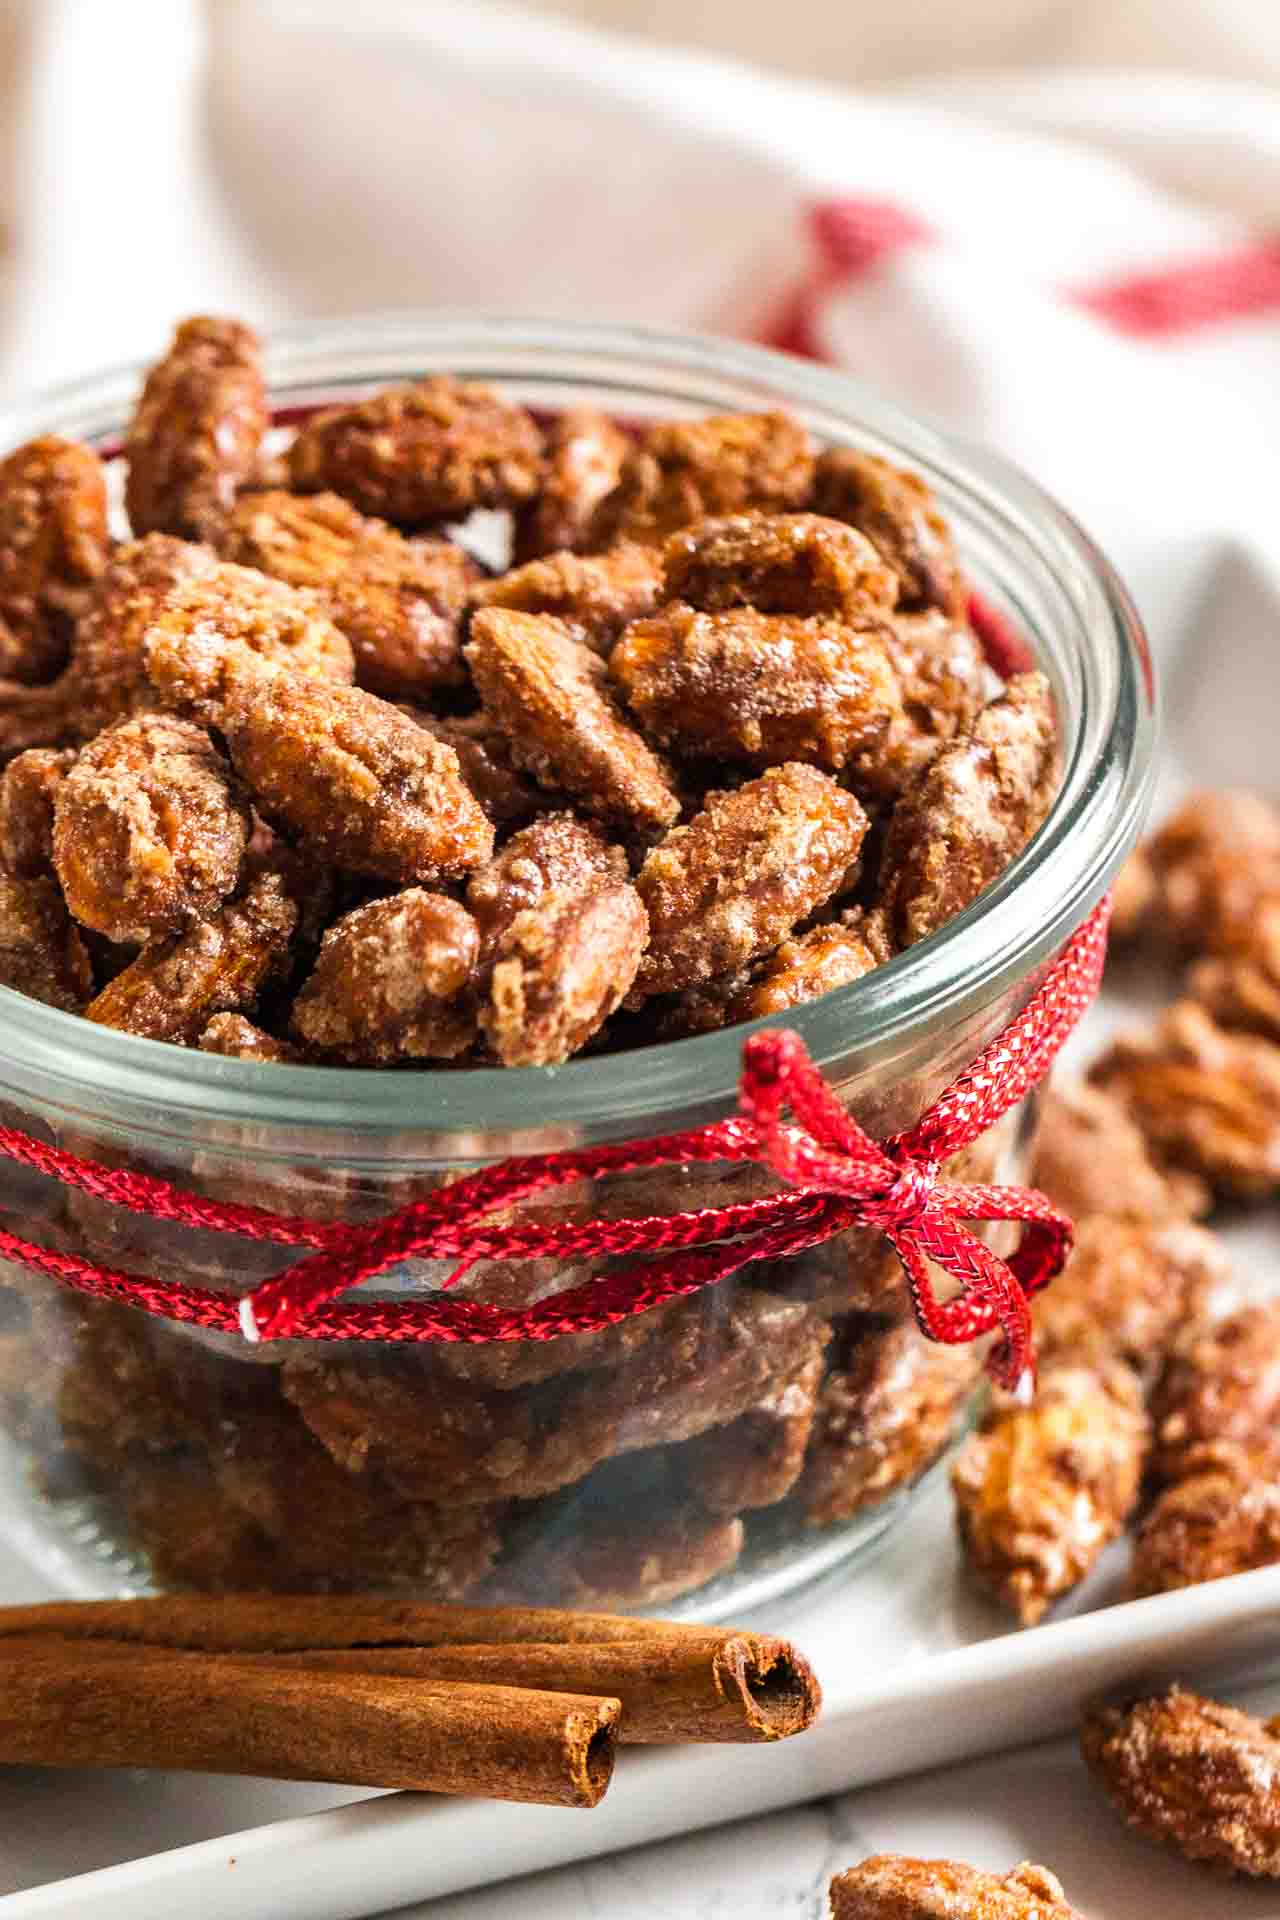 A glass bowl of cinnamon candied almonds with a red ribbon around it next to some more of the almonds.